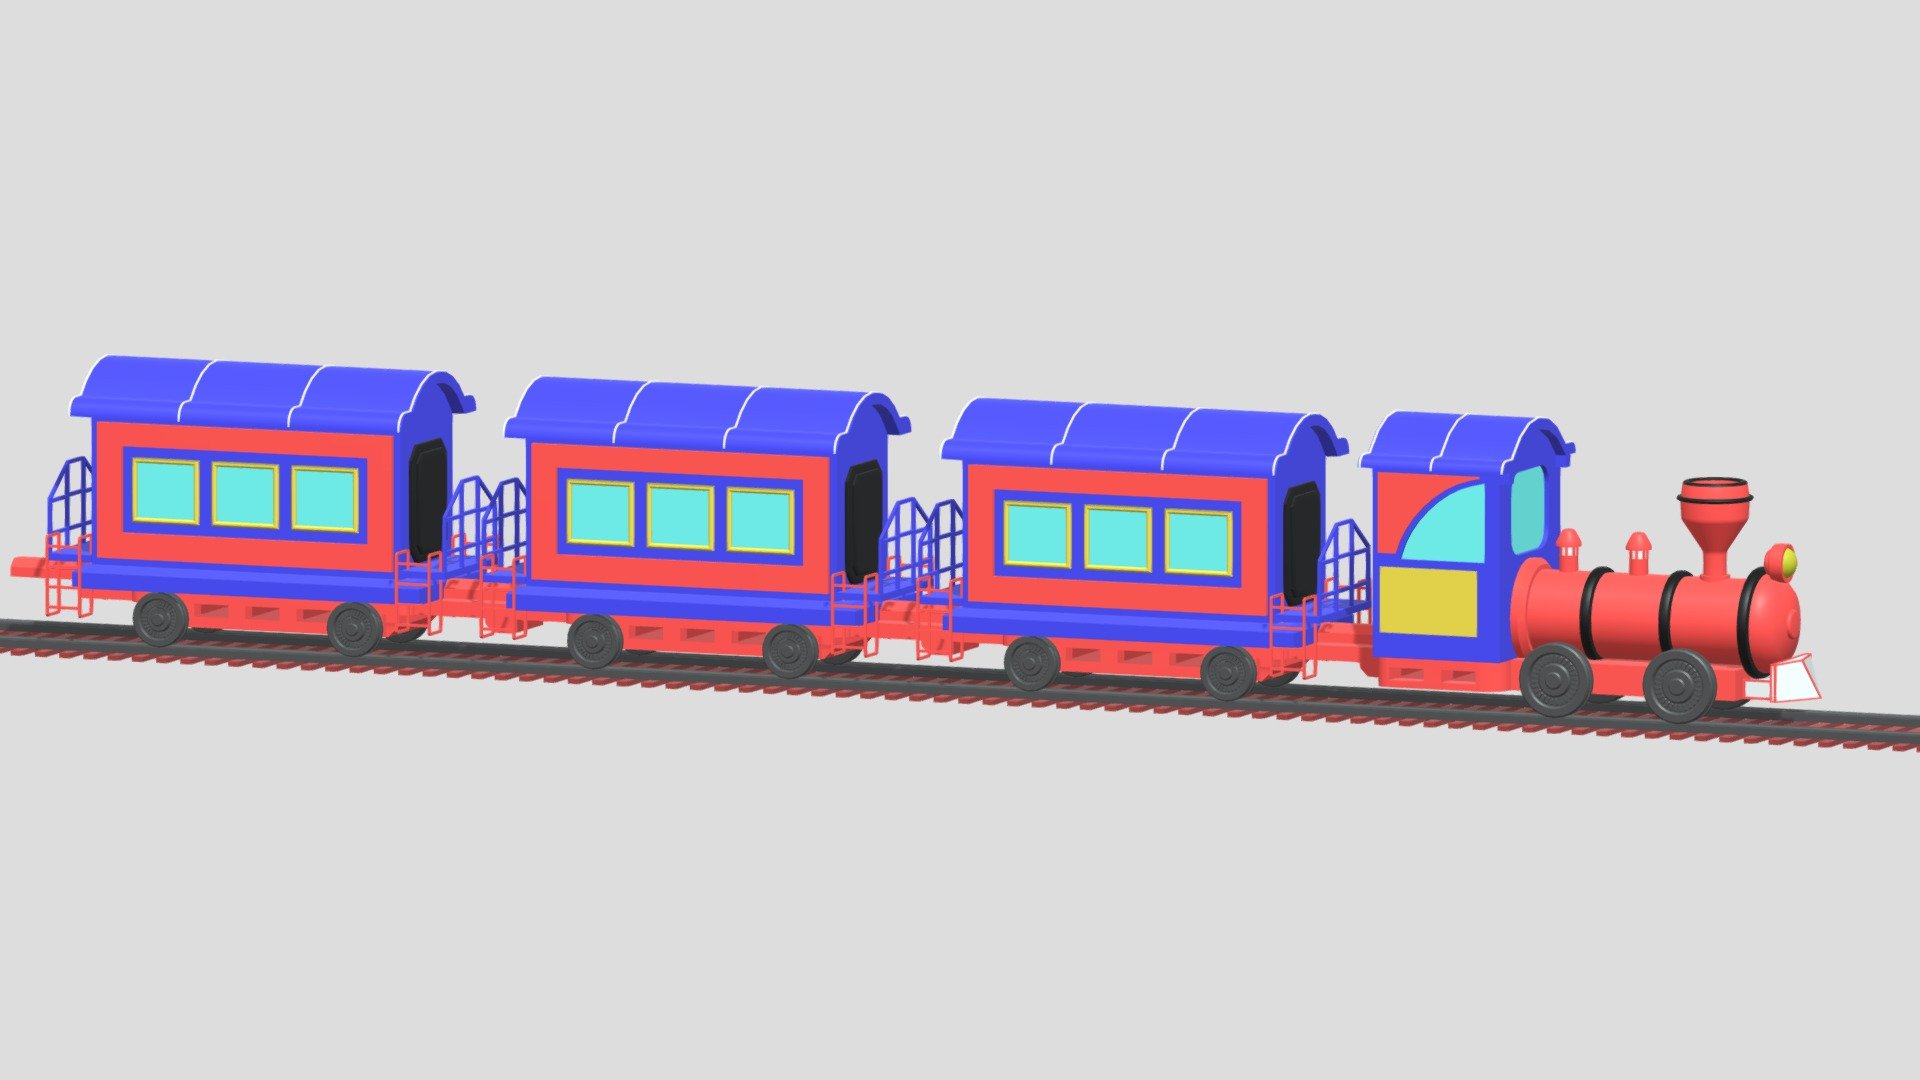 -Cartoon Train.

-This product contains 22 objects.

-Total vert: 41,375, poly: 39,667.

-Materials, objects have the correct names.

-This product was created in Blender 2.8.

-Formats: blend, fbx, obj, c4d, dae, abc, stl, glb, unity.

-We hope you enjoy this model.

-Thank you 3d model